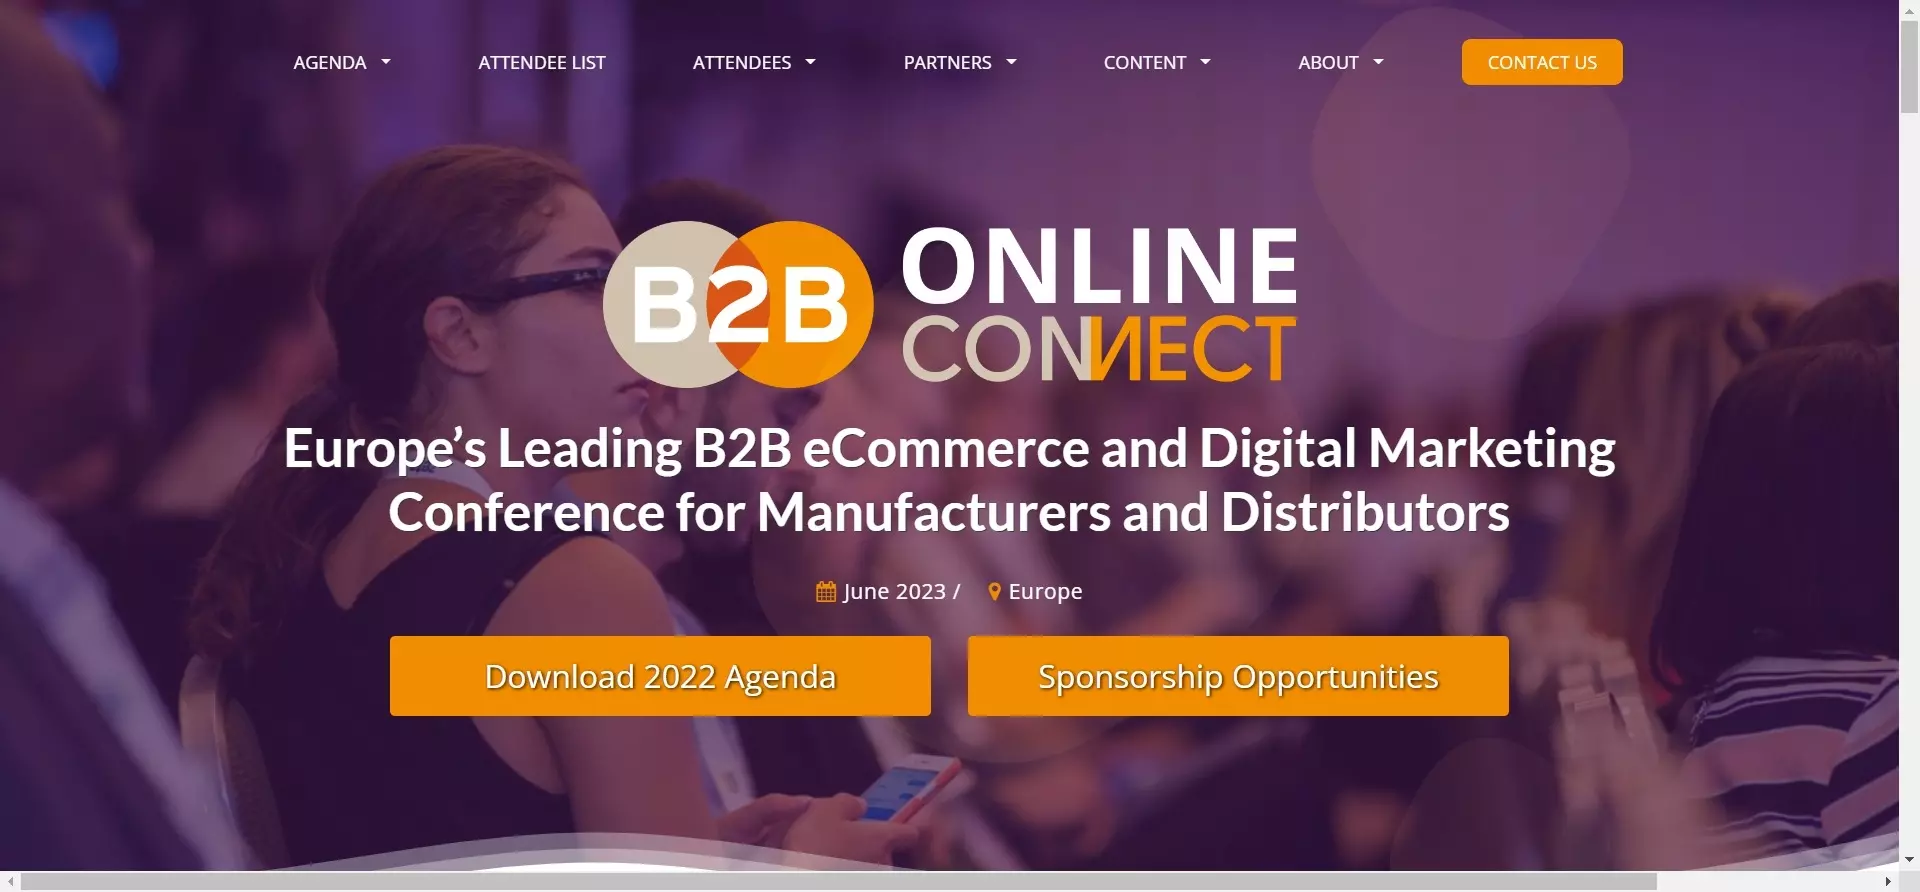 email marketing event b2b online